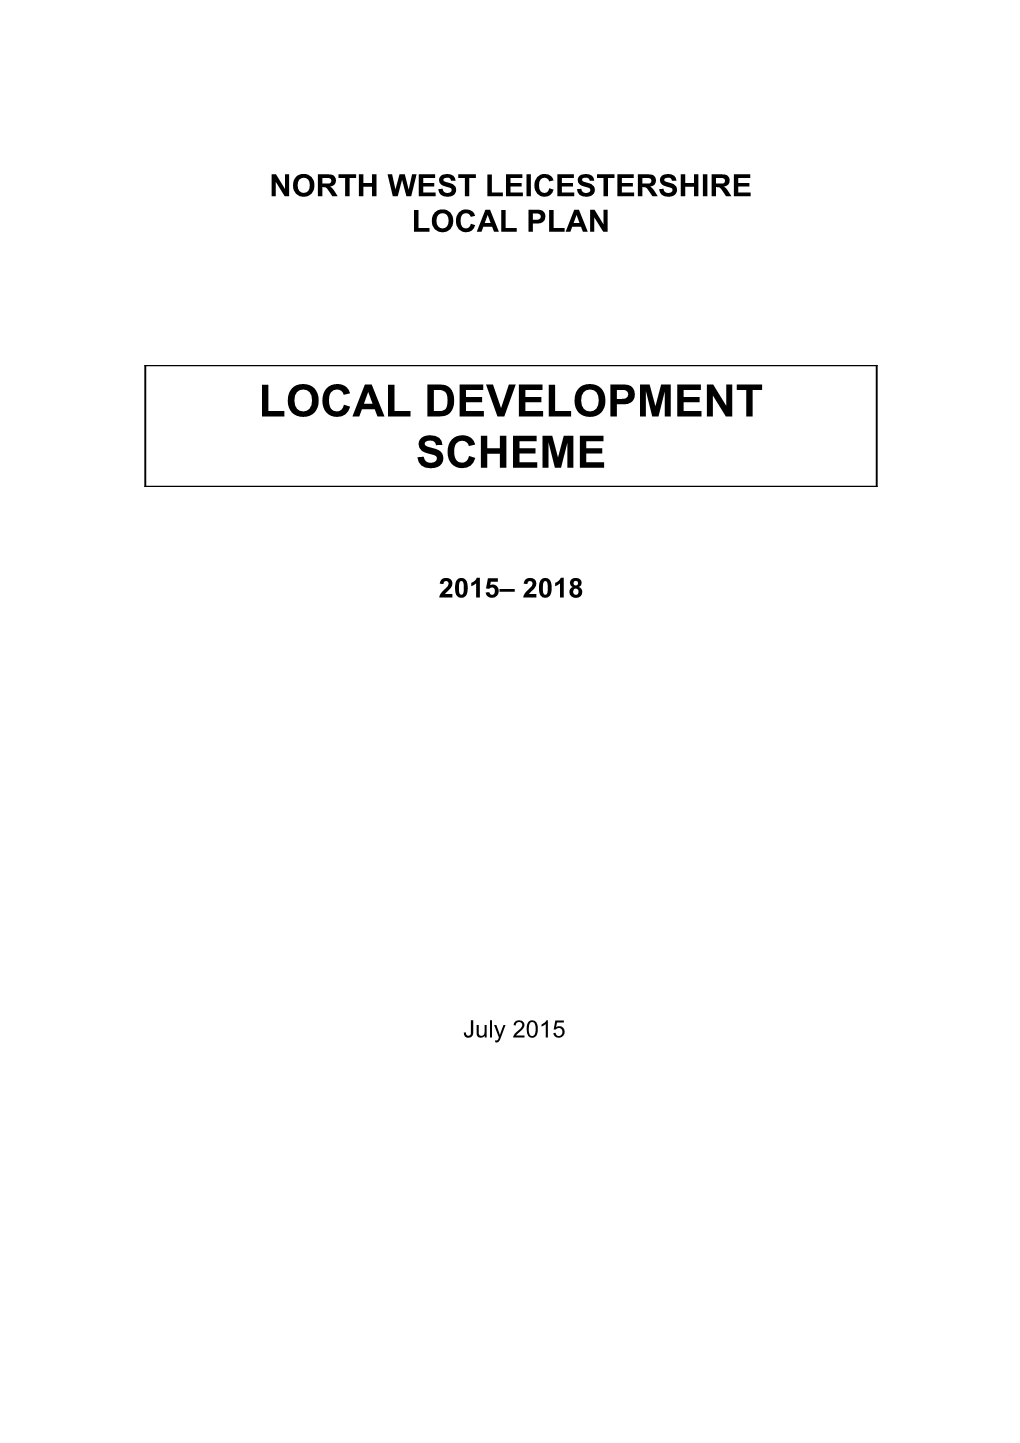 The North West Leicestershire Local Plan